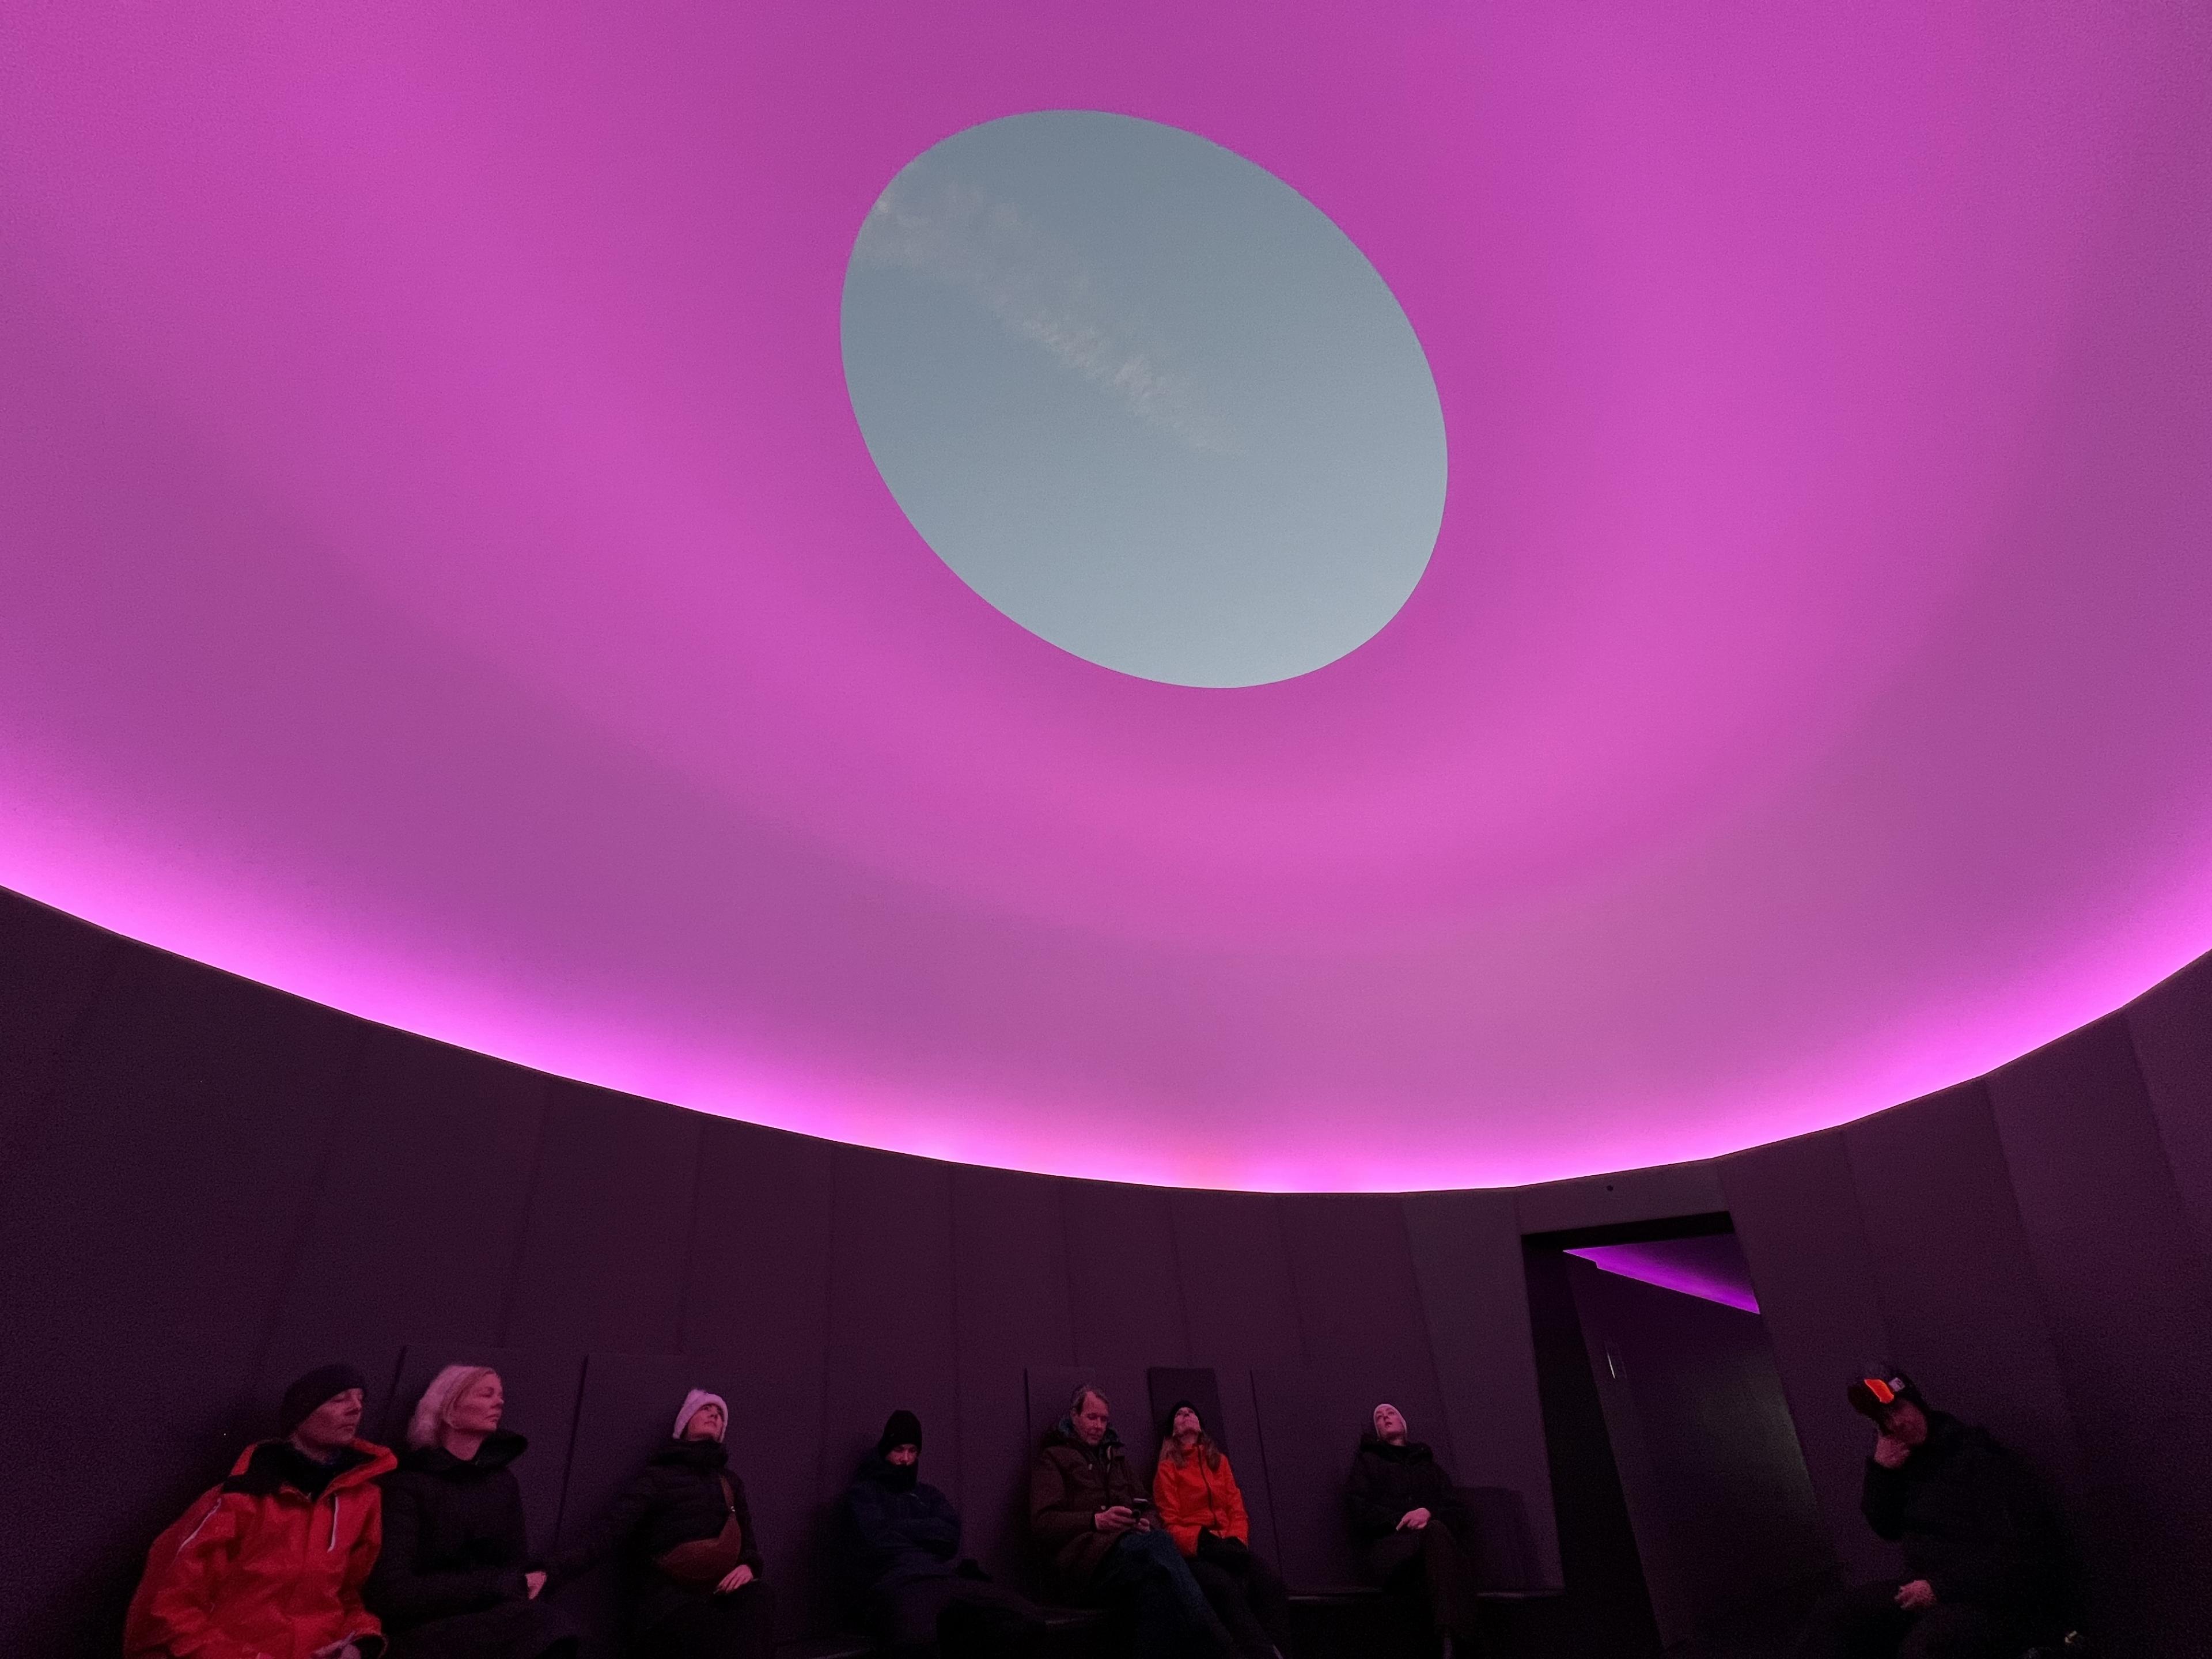 looking up at oval hole in the ceiling of james turrell skyspace during light show where ceiling and walls are lit in pink